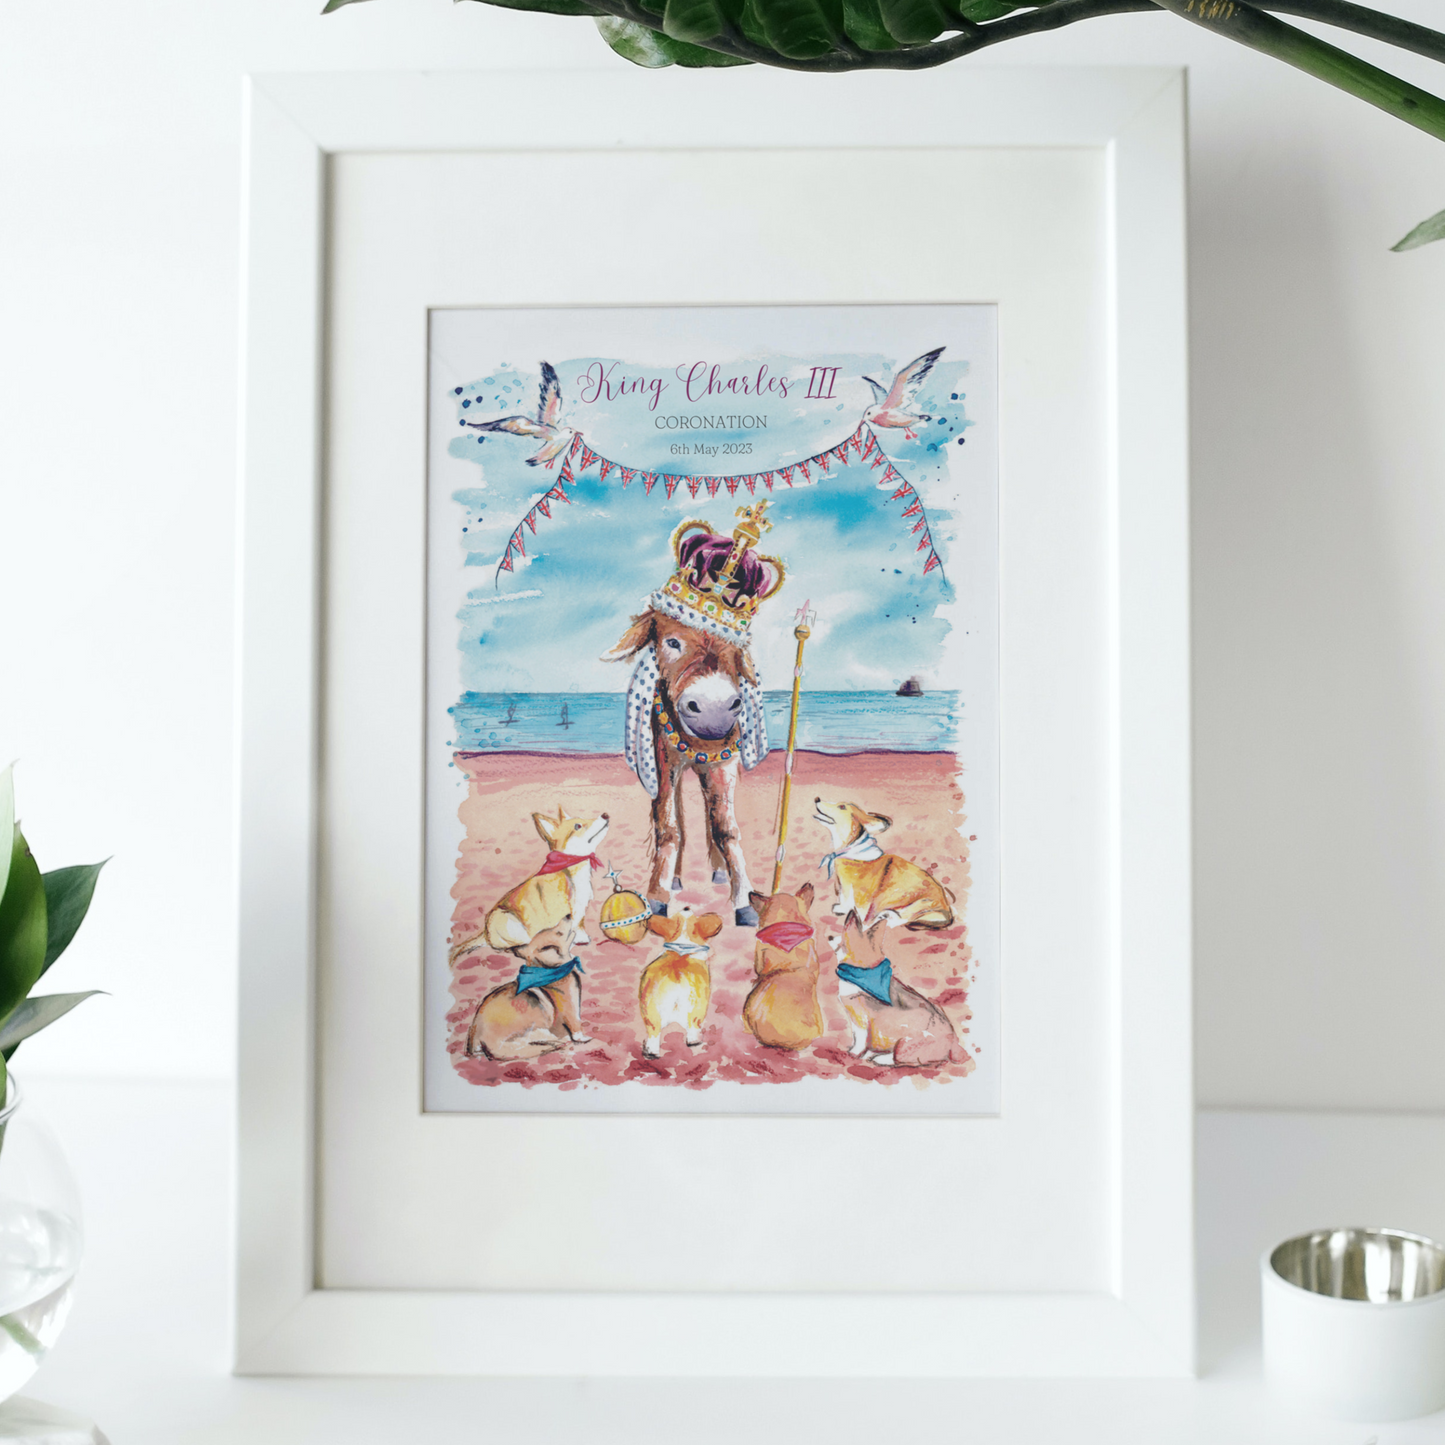 A limited edition signed print to commemorate King Charles III Coronation, featuring a donkey in the crown jewels on Cleethorpes beach surrounded by some royal corgis. Painted in watercolours by Eve Leoni Smith and framed in a white frame.